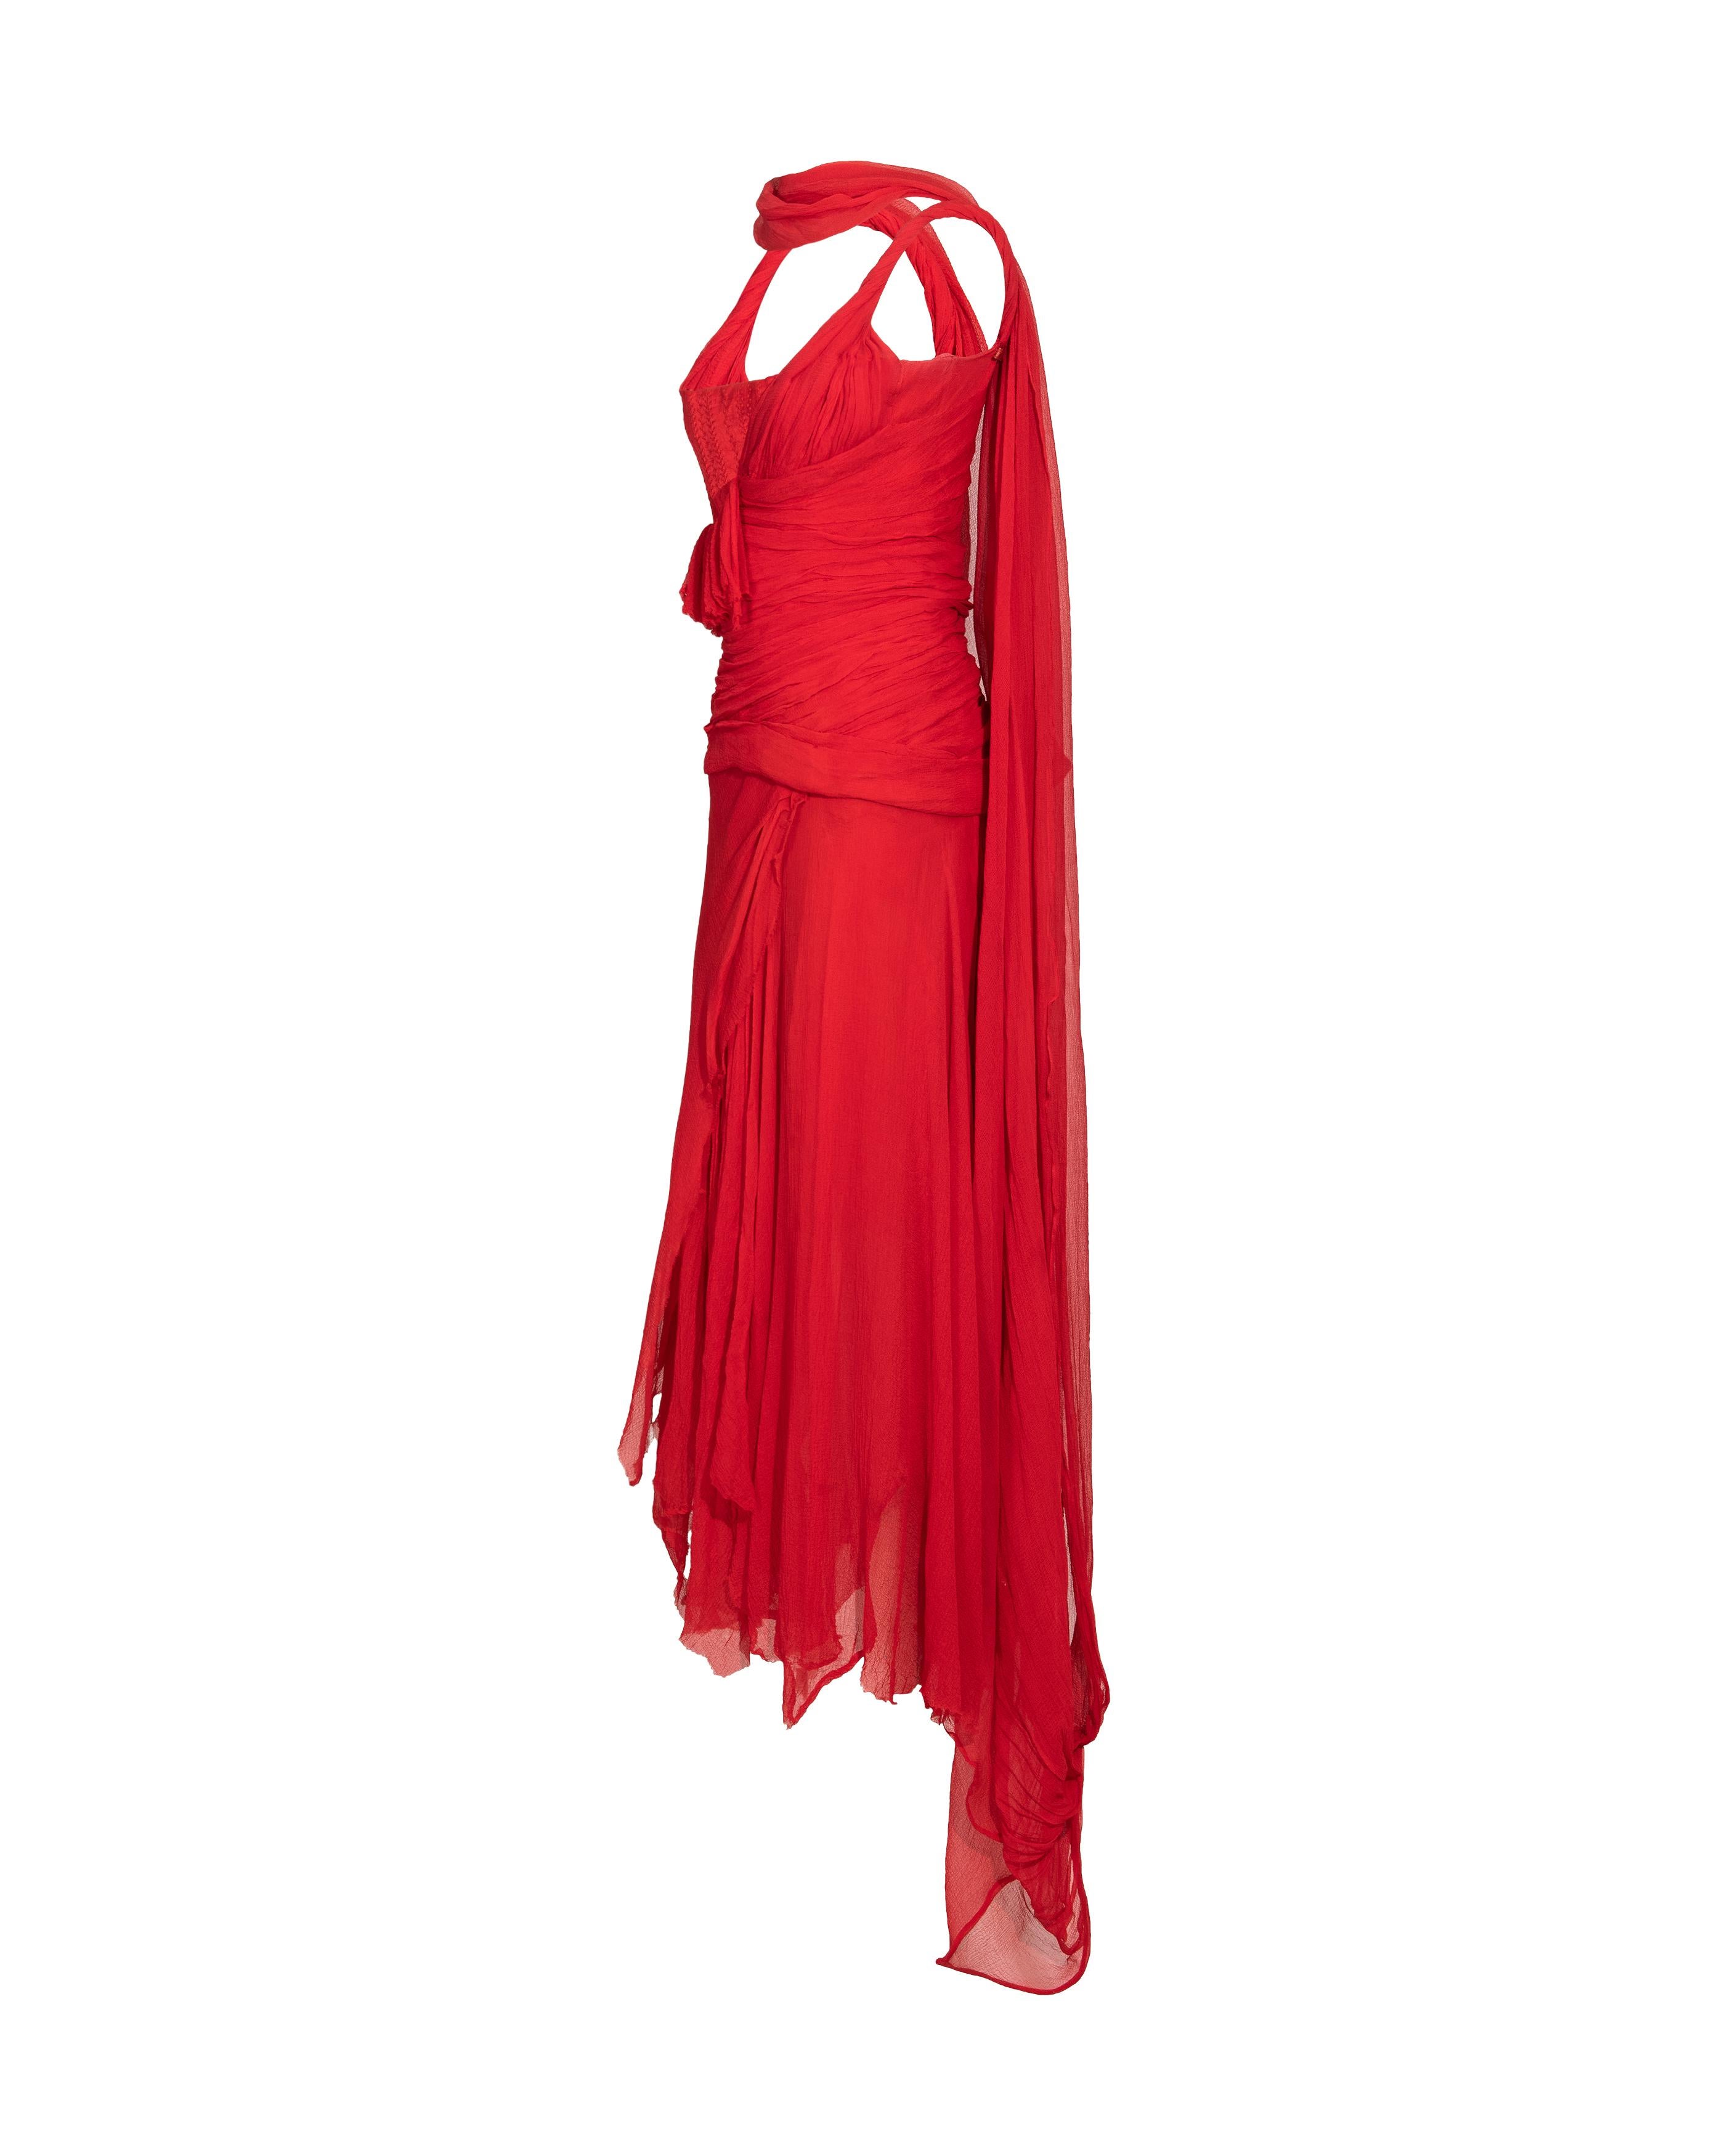 Women's S/S 2003 Alexander McQueen  'Irere' Collection Red Silk Chiffon Gown with Sash